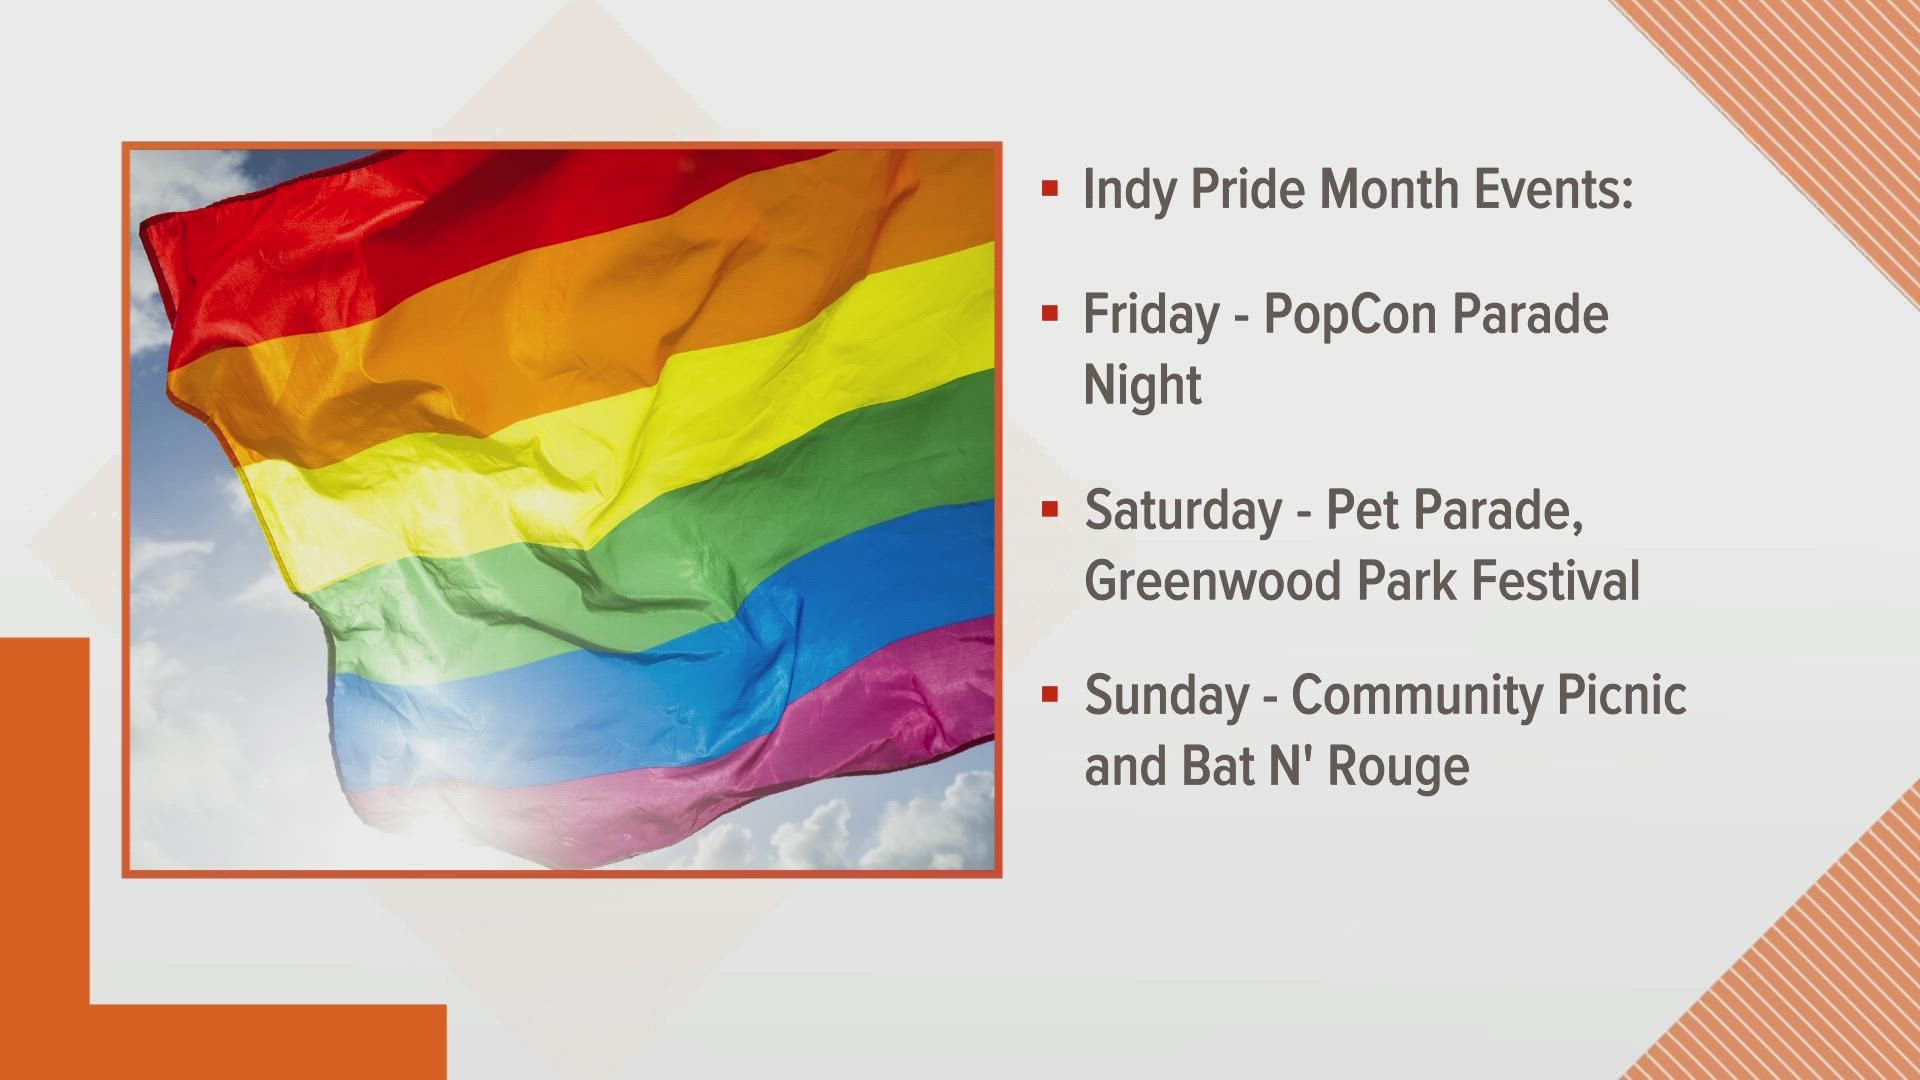 Gina Glaros reports on how IndyGo is kicking off the month of celebrations.